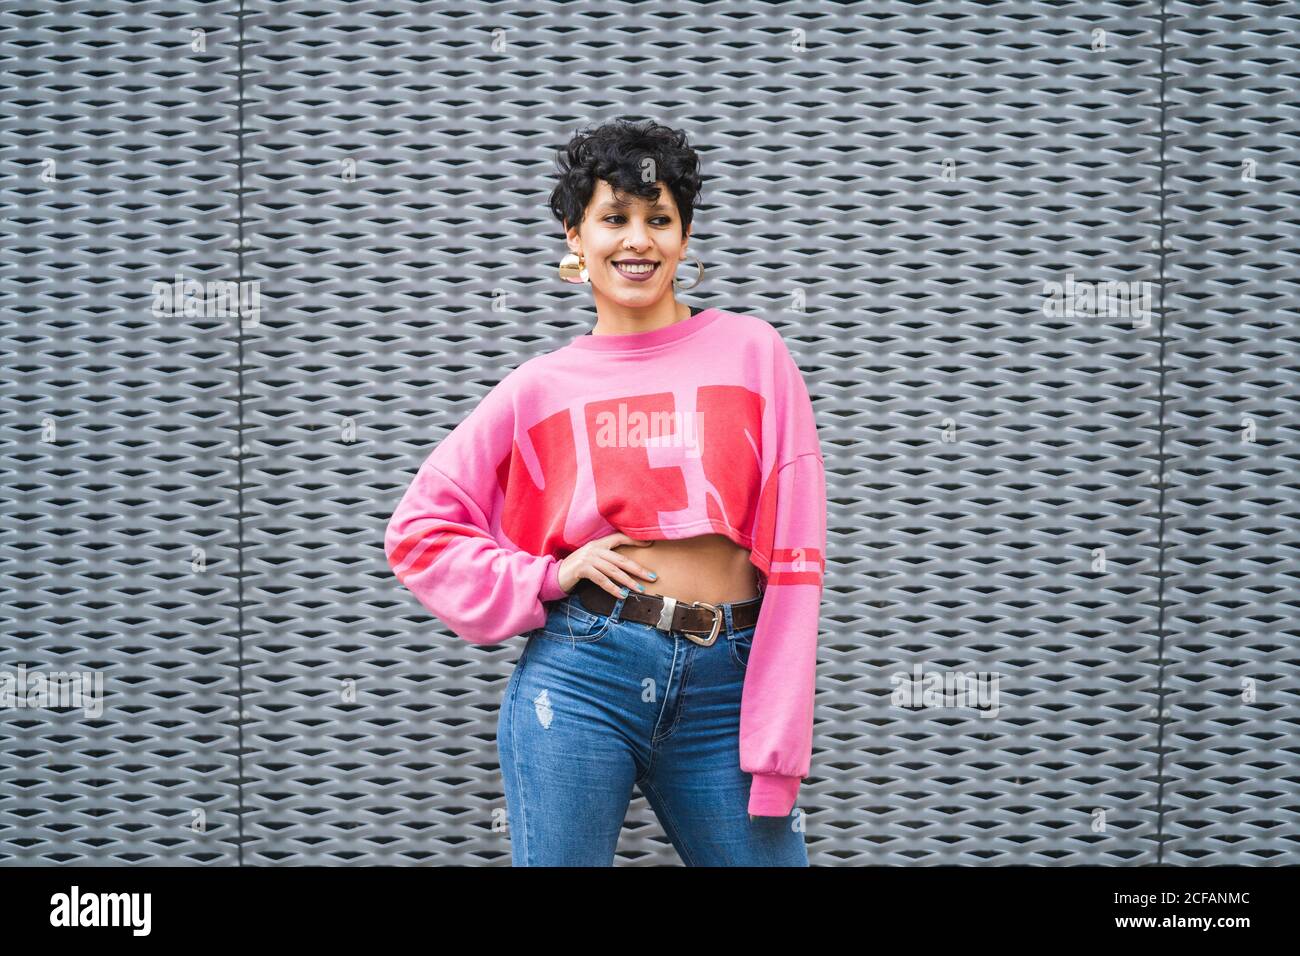 Confident cheerful ethnic black haired lady in stylish pink sweatshirt and jeans standing with hand on waist smiling away in front of grey wall Stock Photo